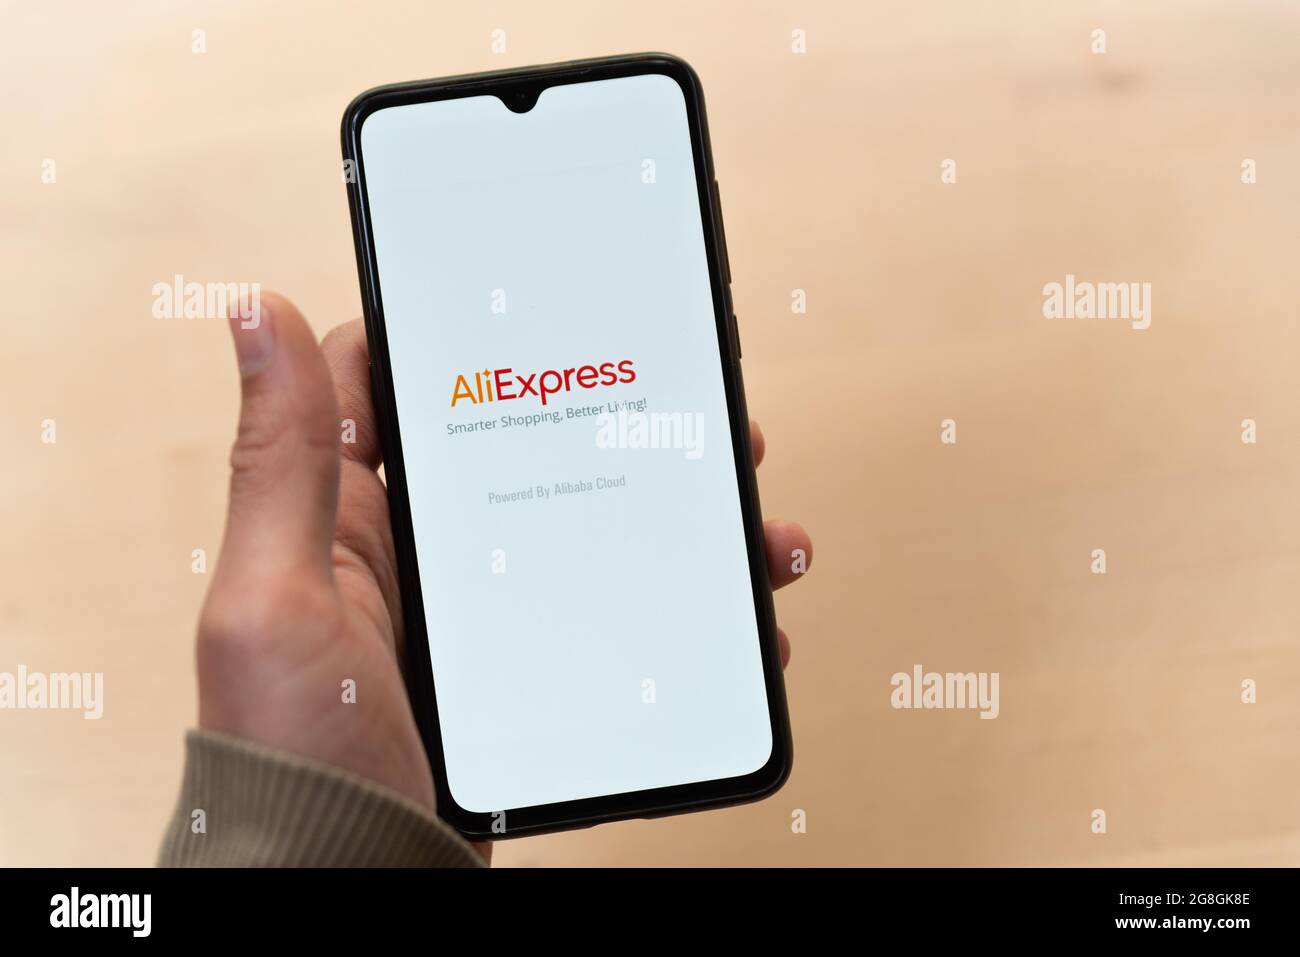 A hand holds a mobile phone with the popular chinese e-commerce Aliexpress  mobile app logo in the display in Barcelona, Spain on July 18 2021.  Aliexpress is a popular online shopping app